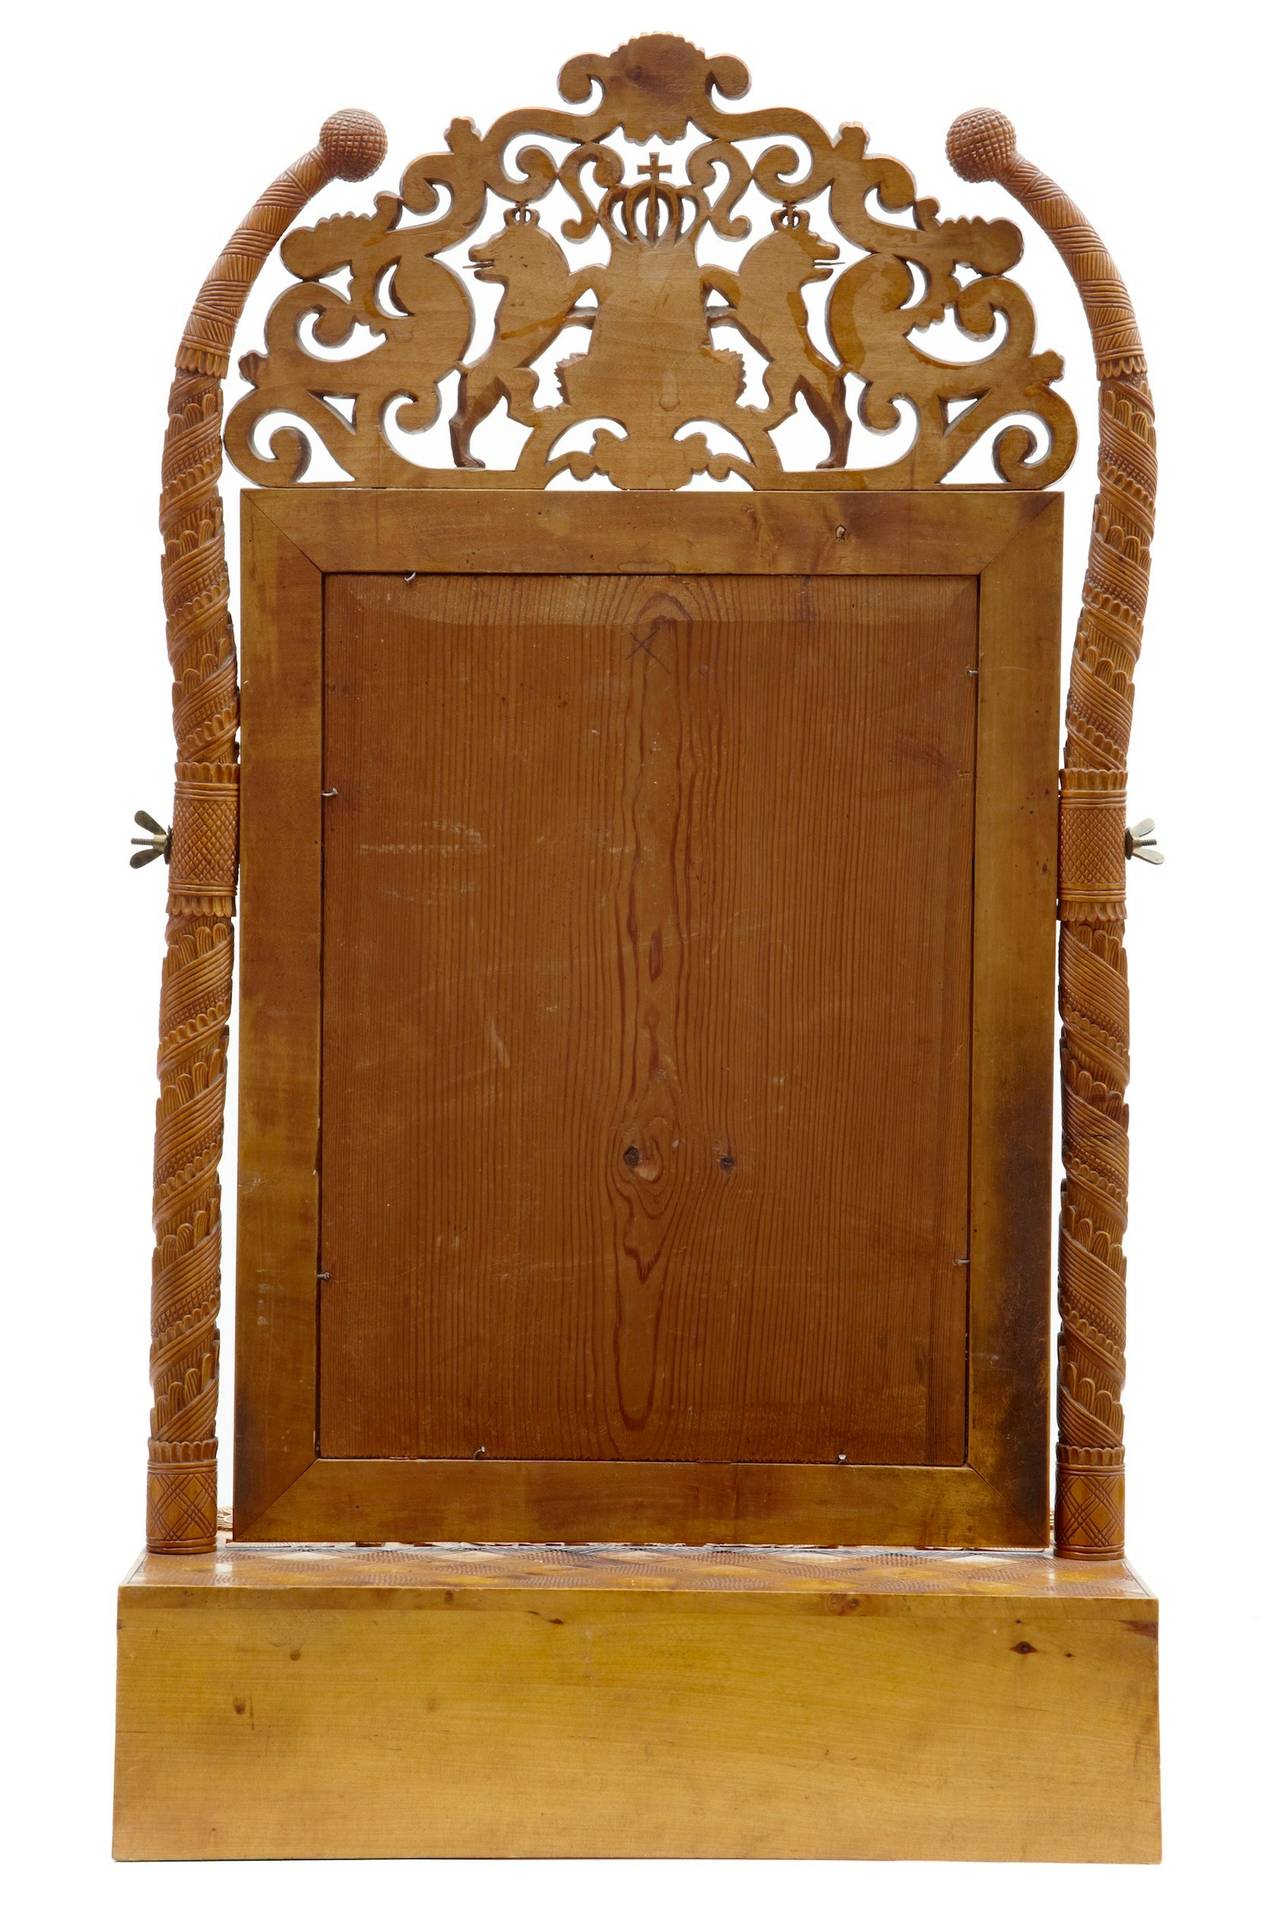 Rare 19th Century Swedish Carved Birch Table Mirror with Indian Influence In Good Condition In Debenham, Suffolk